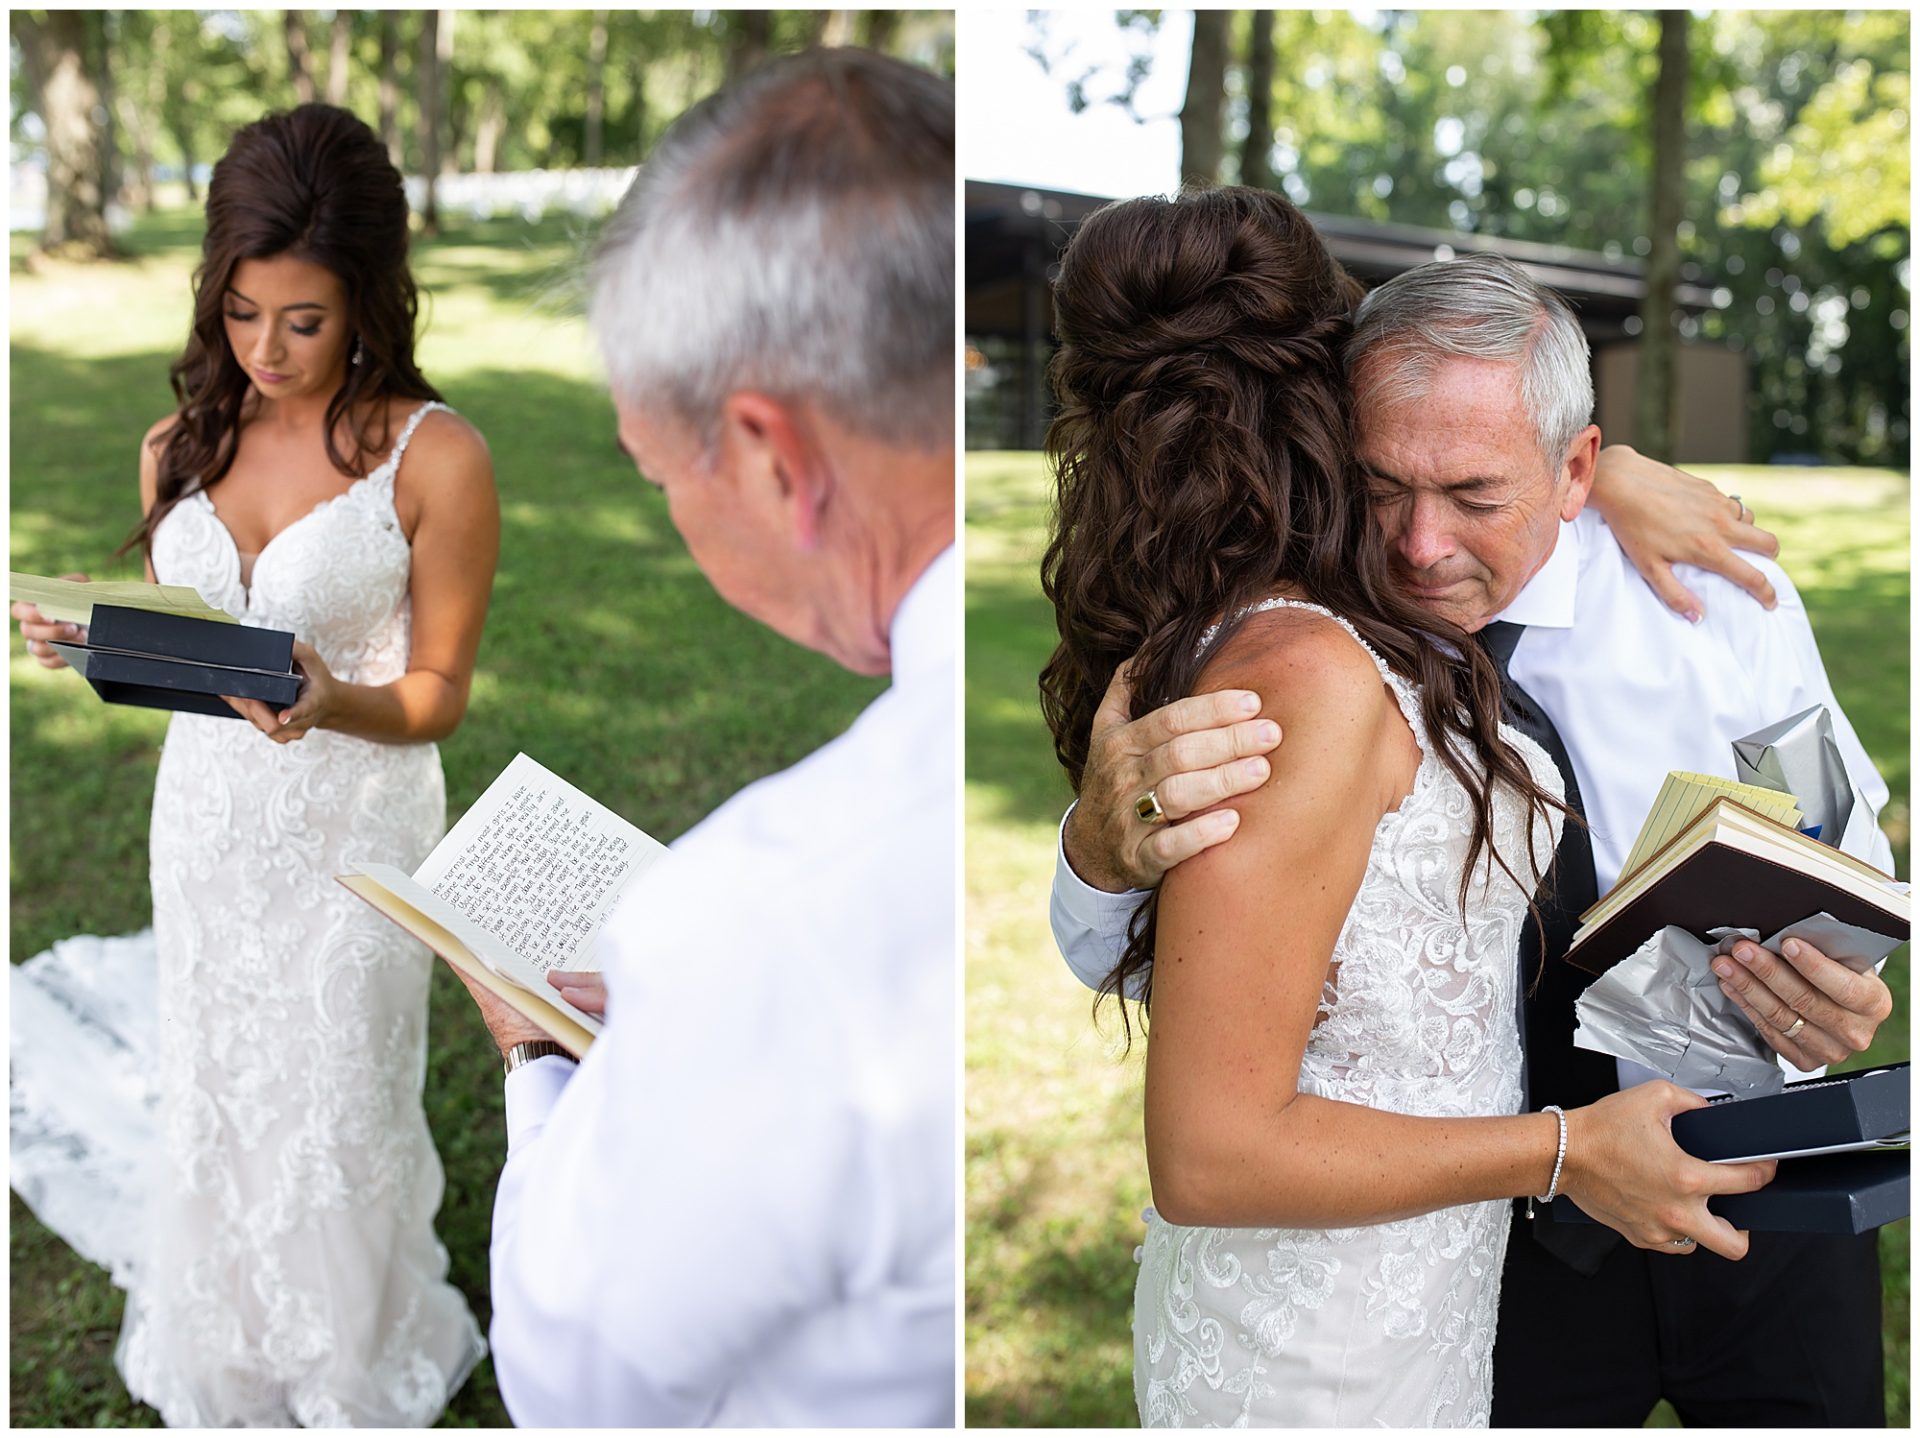 Luxury wedding photographer in Nashville, The Estate at Cherokee Dock, Melanie Grady Photography, Reba McIntire's house, celebrity wedding photographer, bridal portraits, first look with bride and her dad, Old Hickory Lake wedding